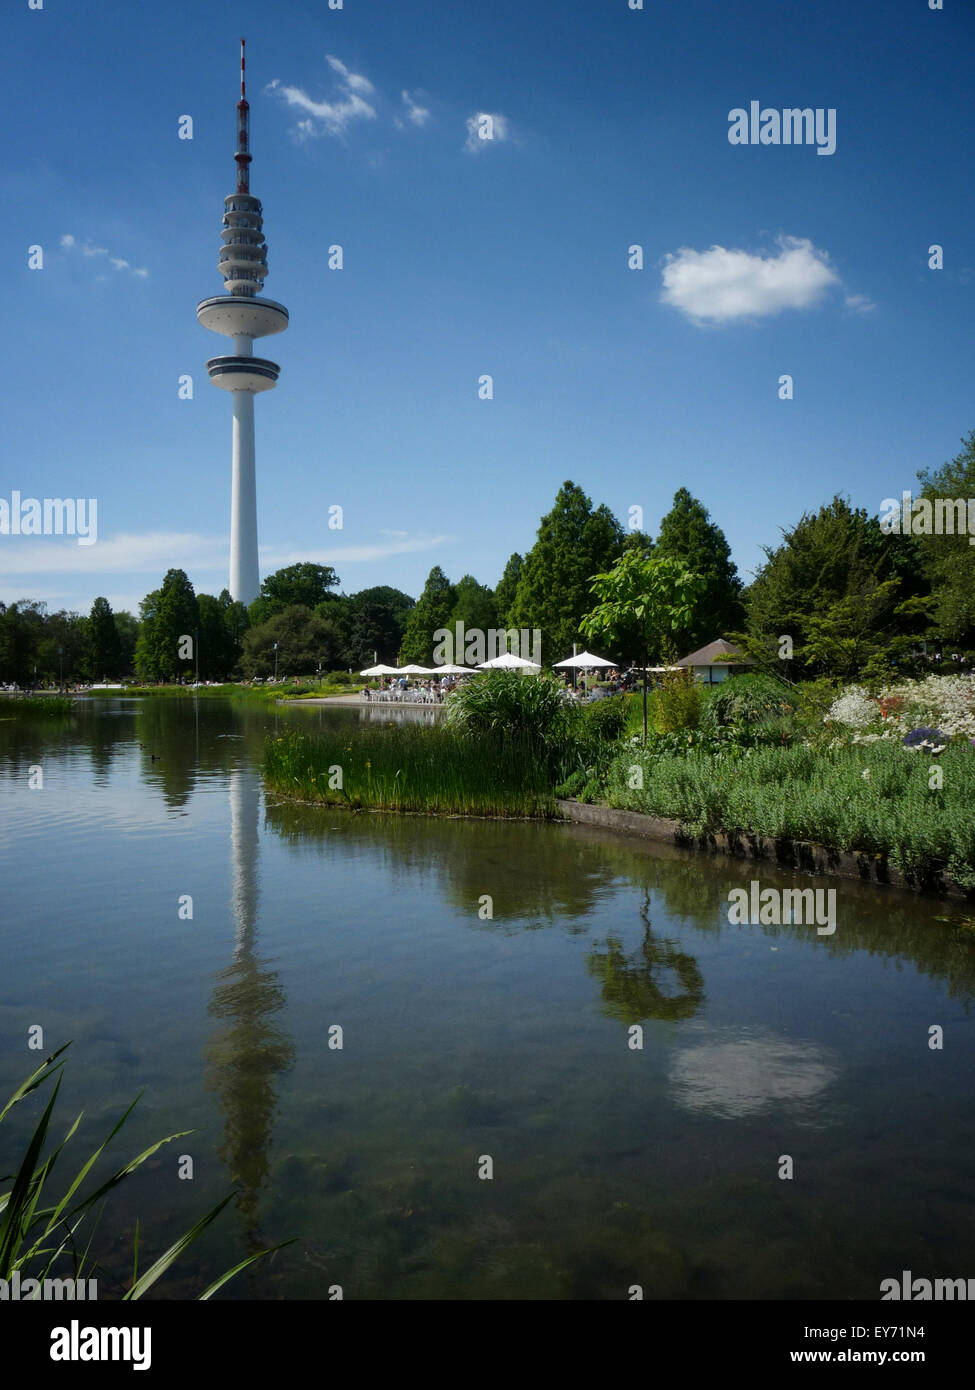 Hamburg television tower in front of Parksee Stock Photo